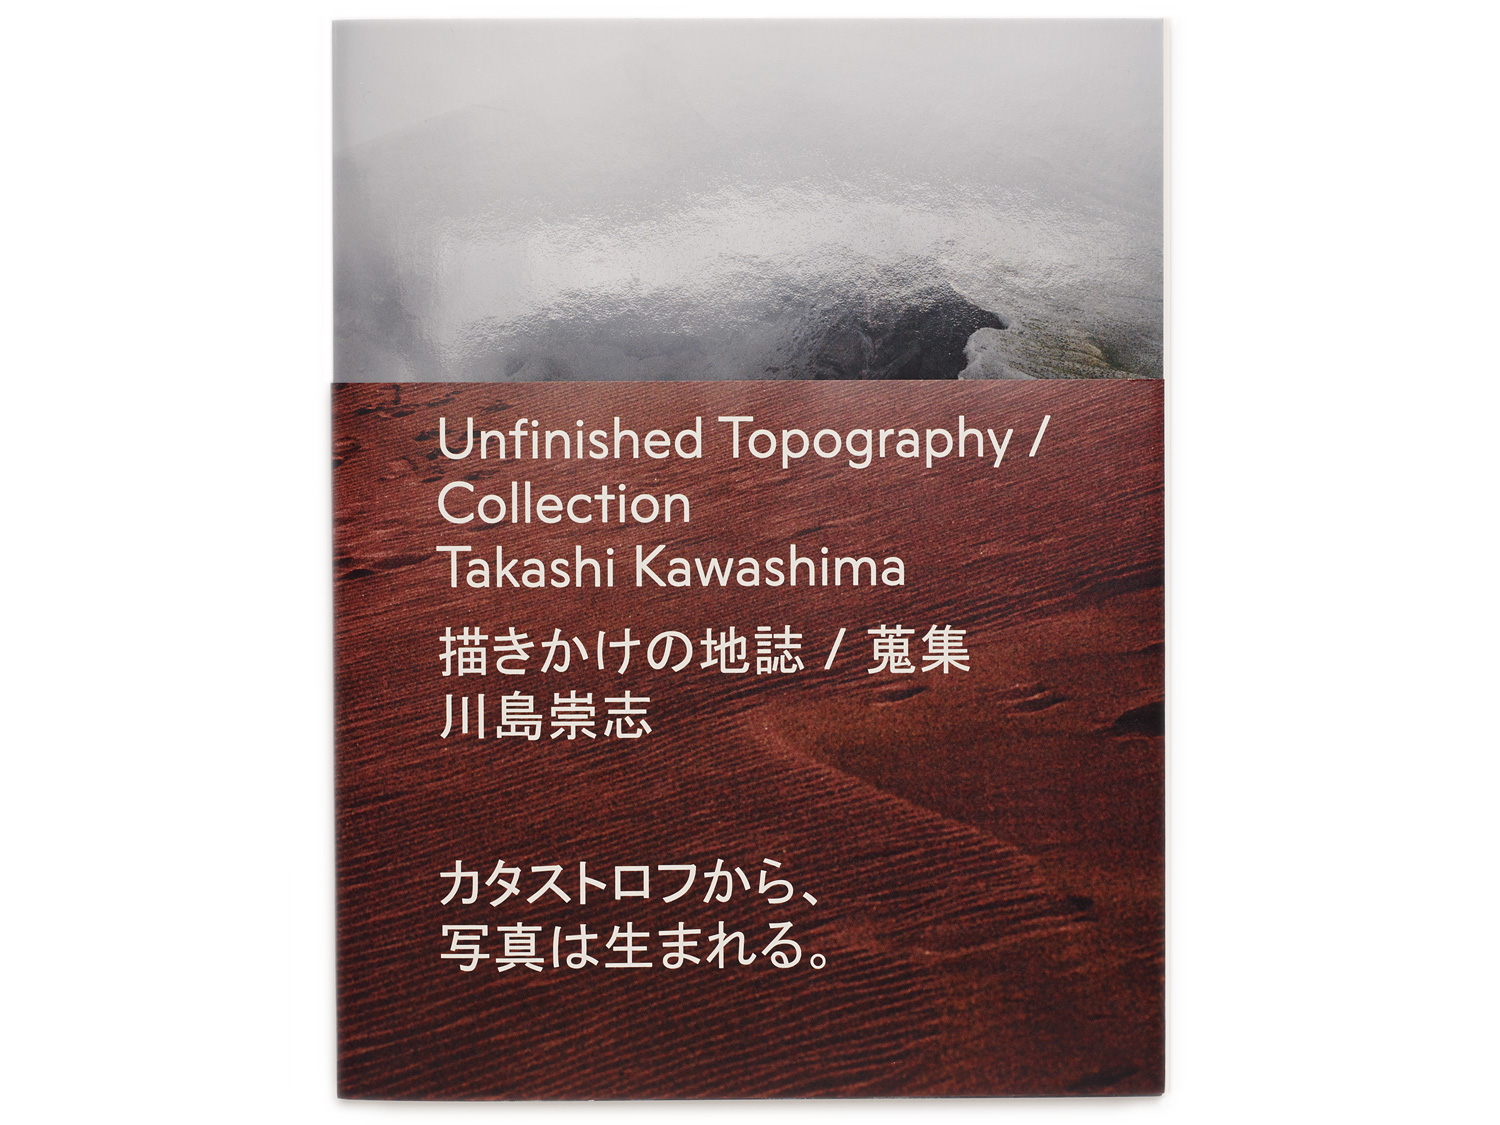 3/31 – Unfinished Topography/Collection